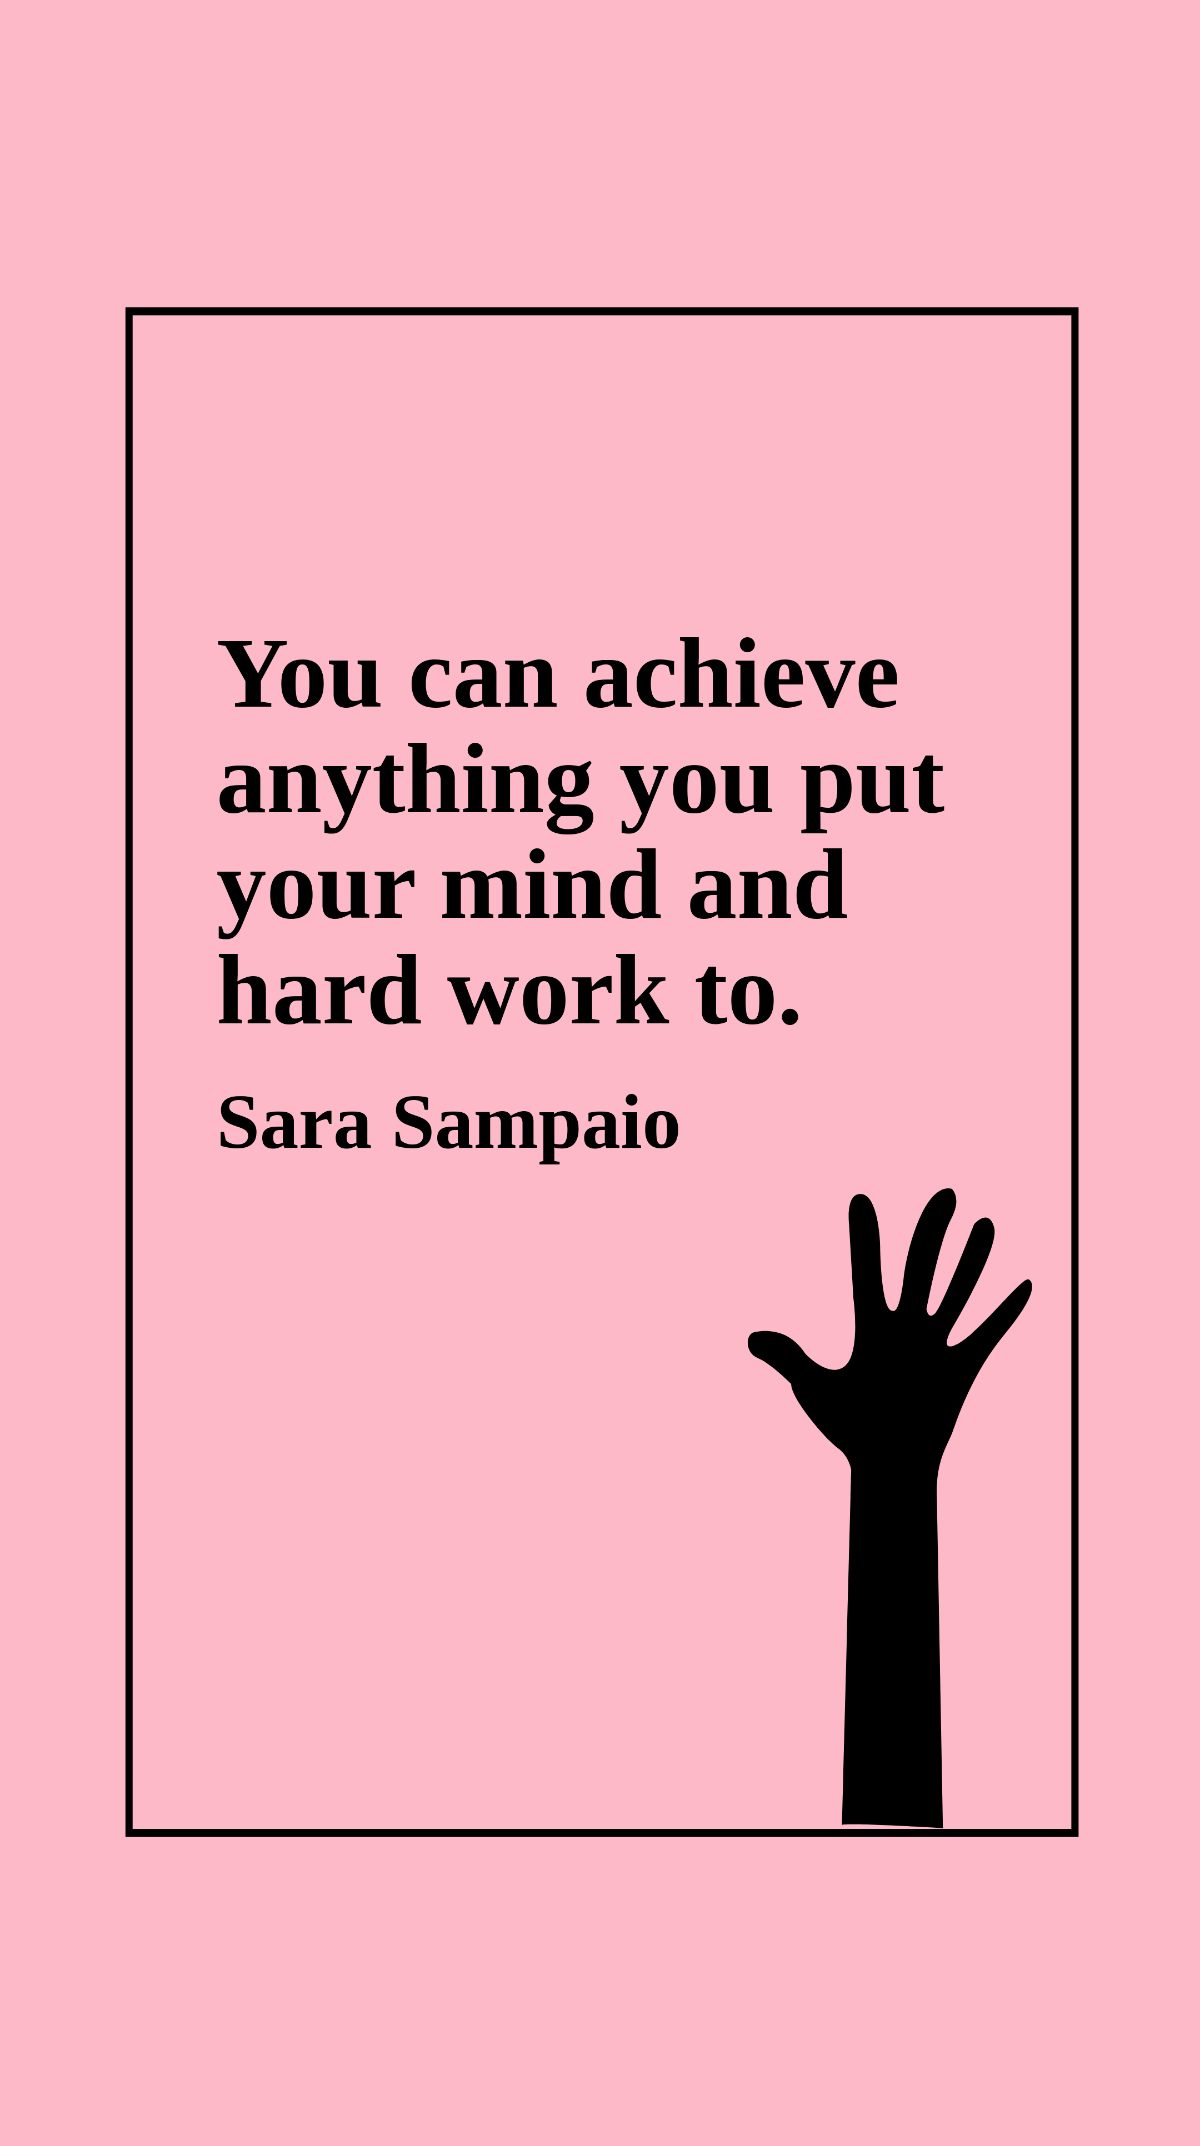 Sara Sampaio - You can achieve anything you put your mind and hard work to. Template